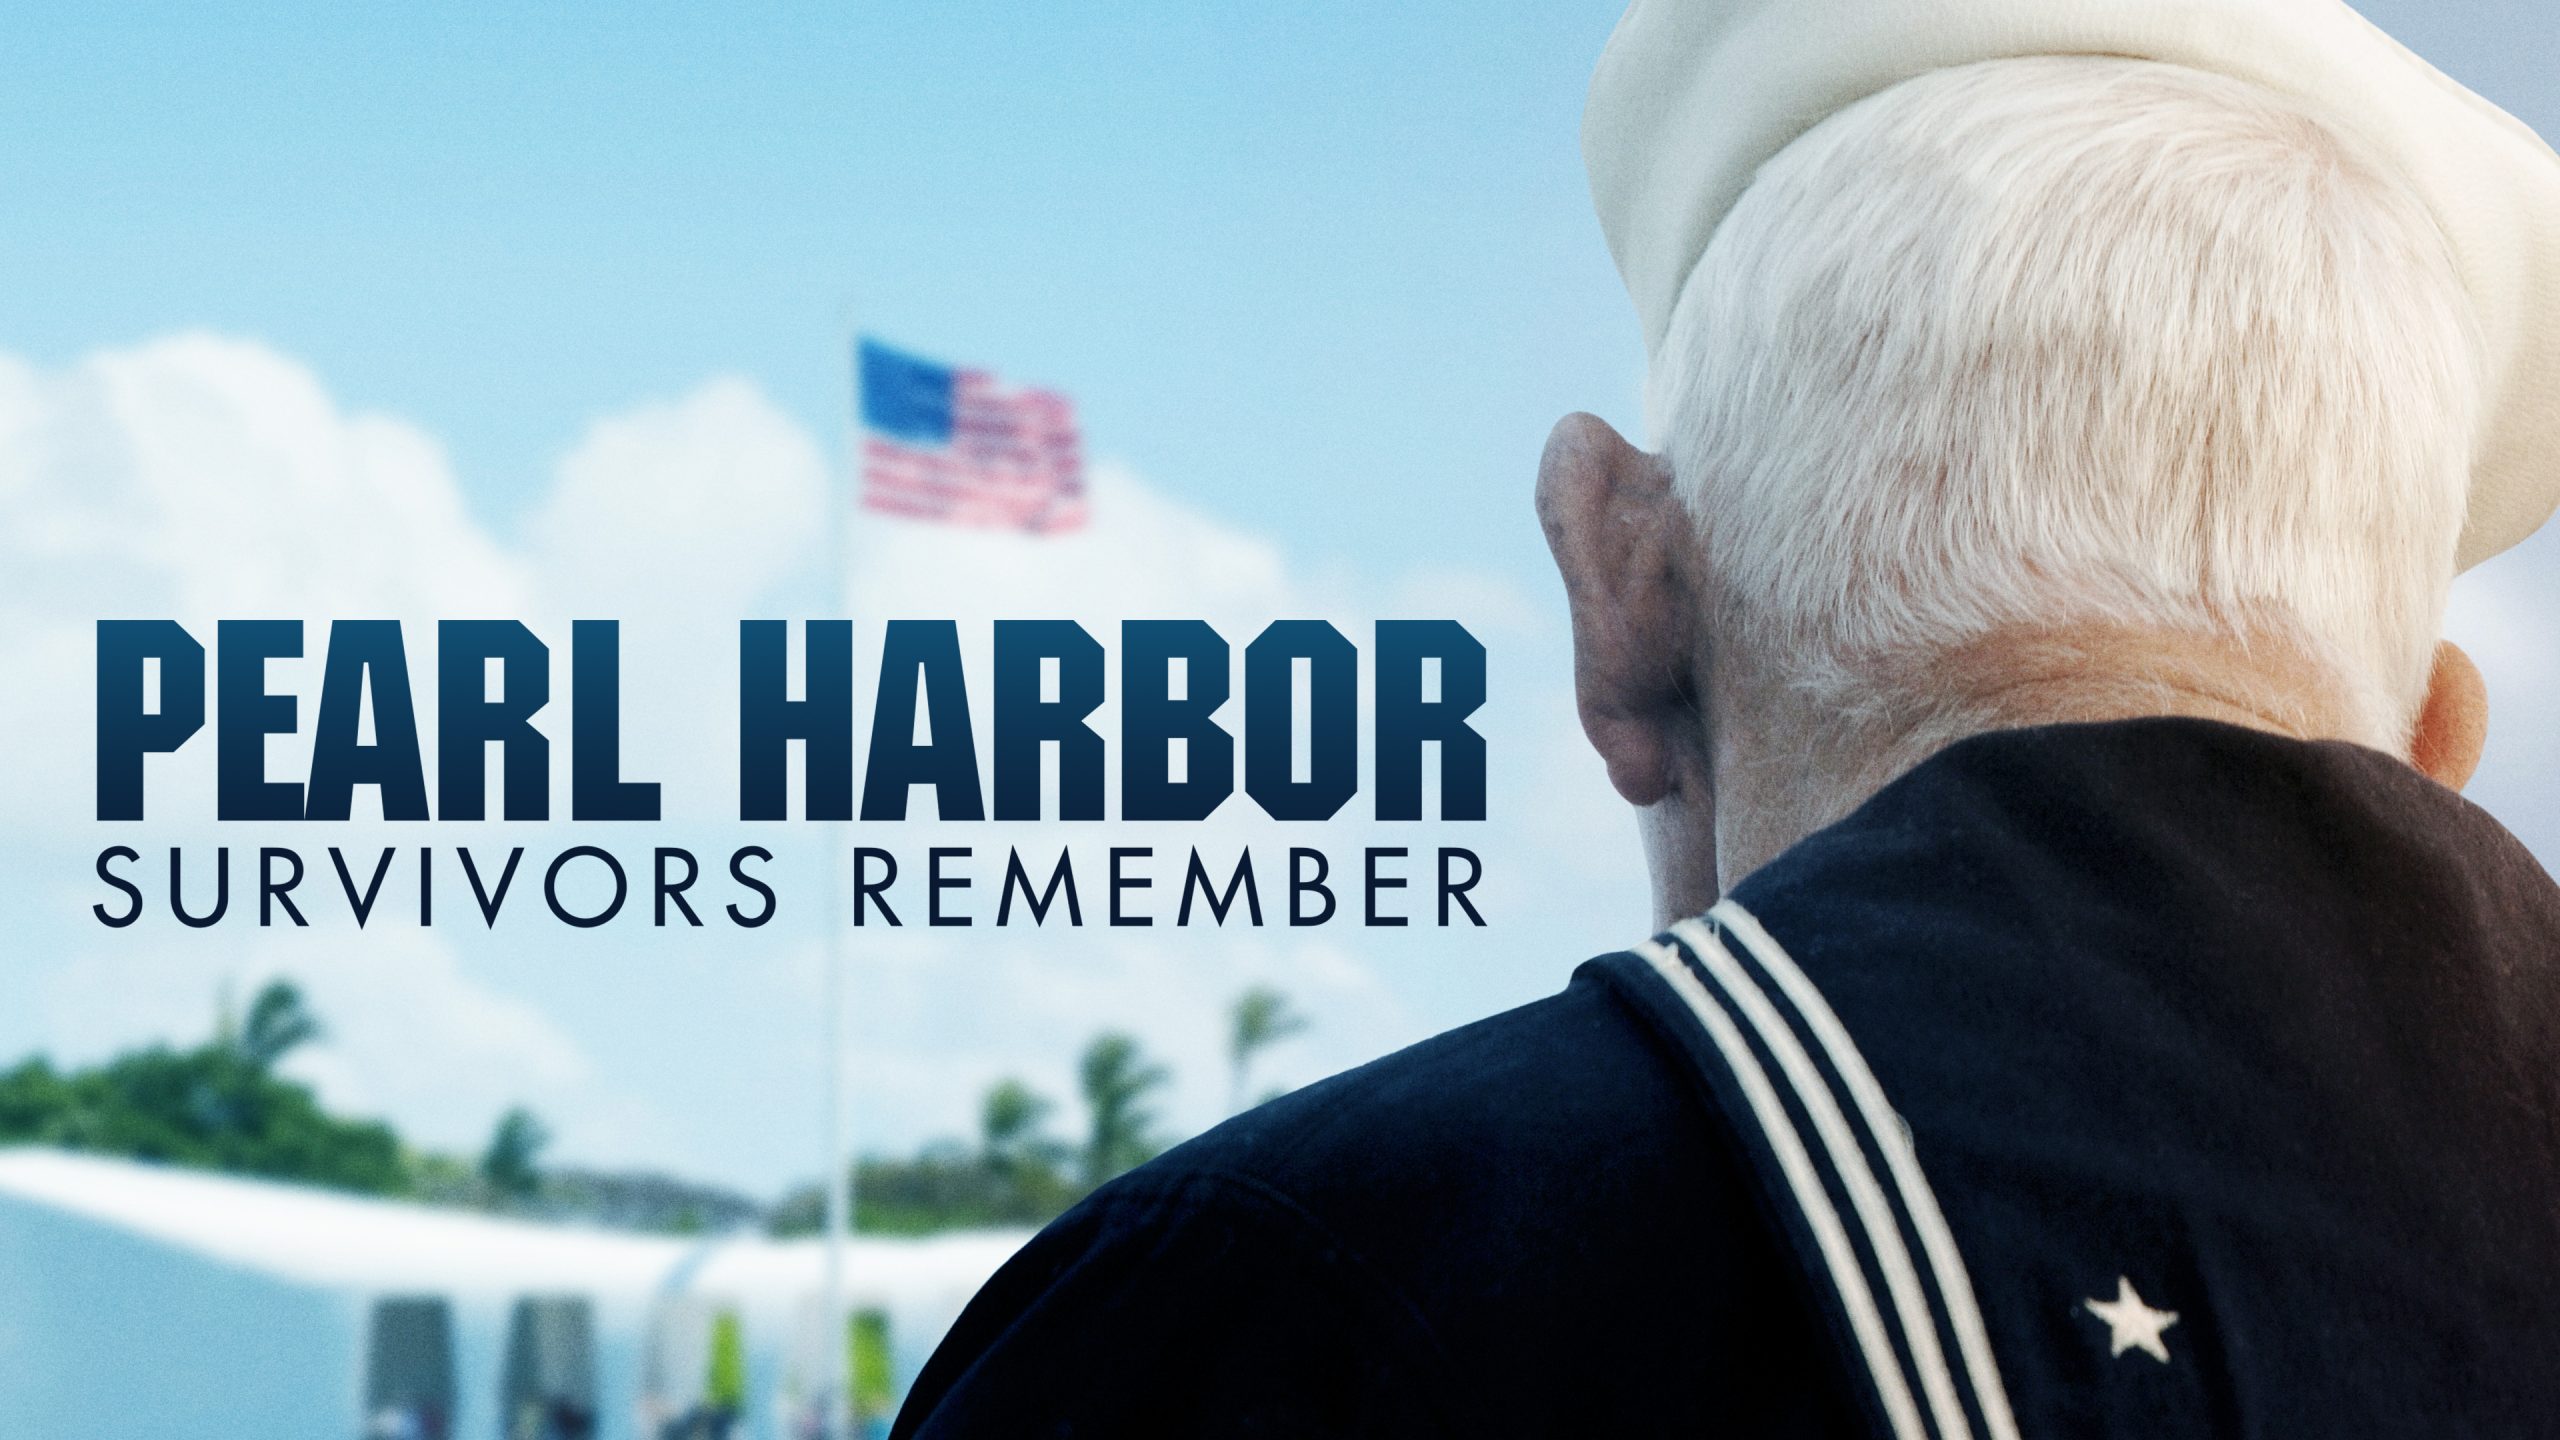 Watch Pearl Harbor: Survivors Remember in HISTORY Vault